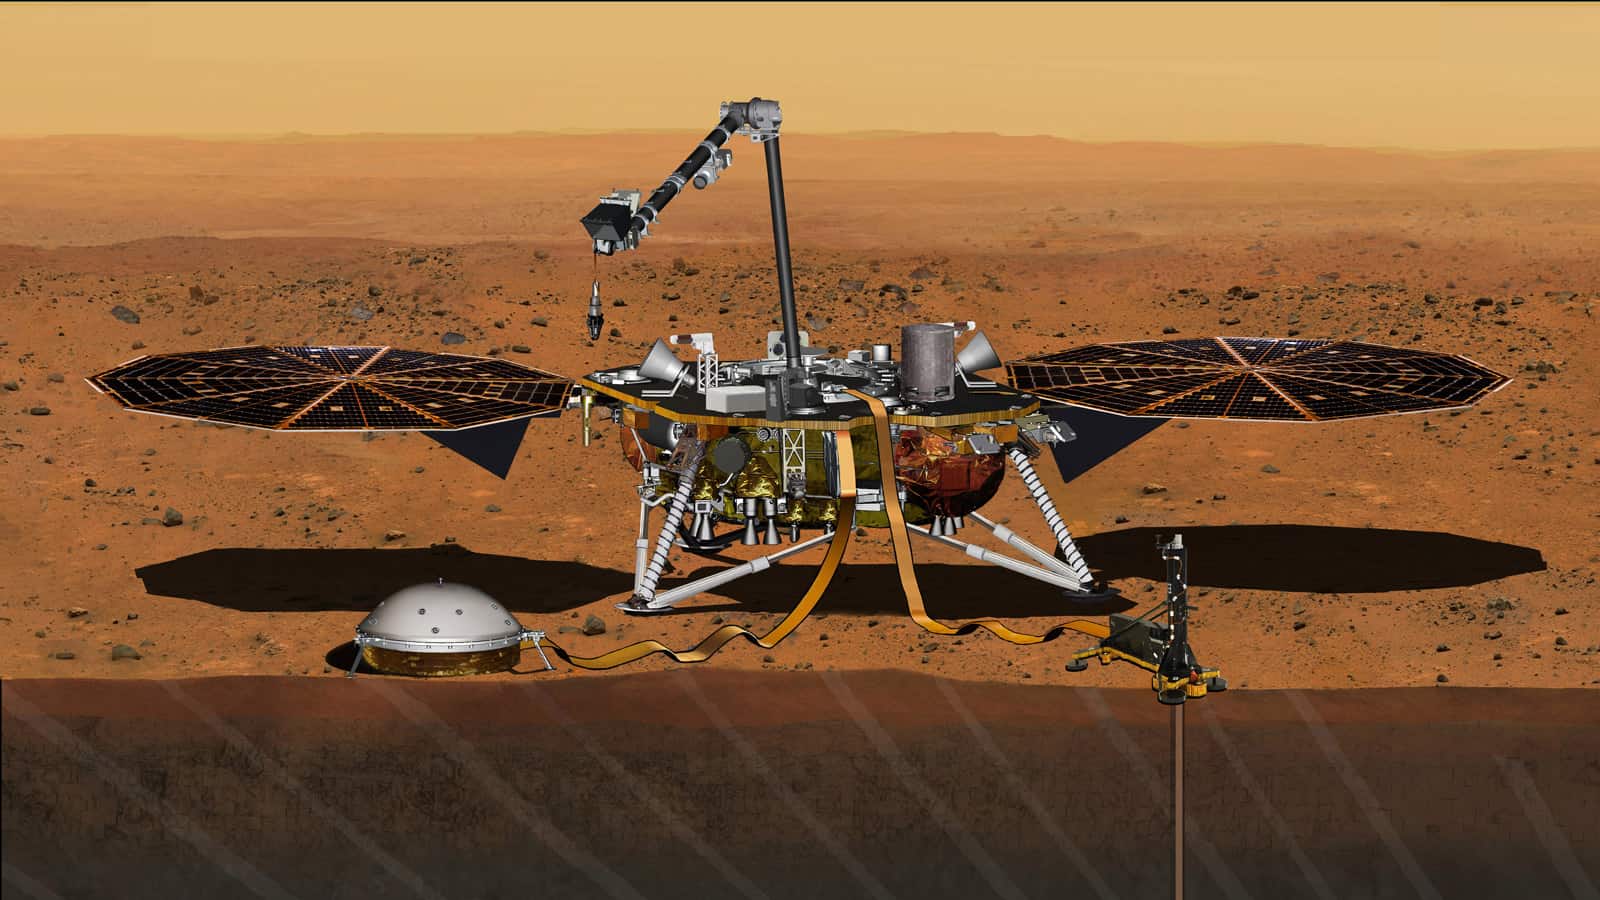 NASA has set a new launch opportunity, beginning May 5, 2018, for the InSight mission to Mars. InSight is the first mission dedicated to investigating the deep interior of Mars. Image credit: NASA/JPL-Caltech 